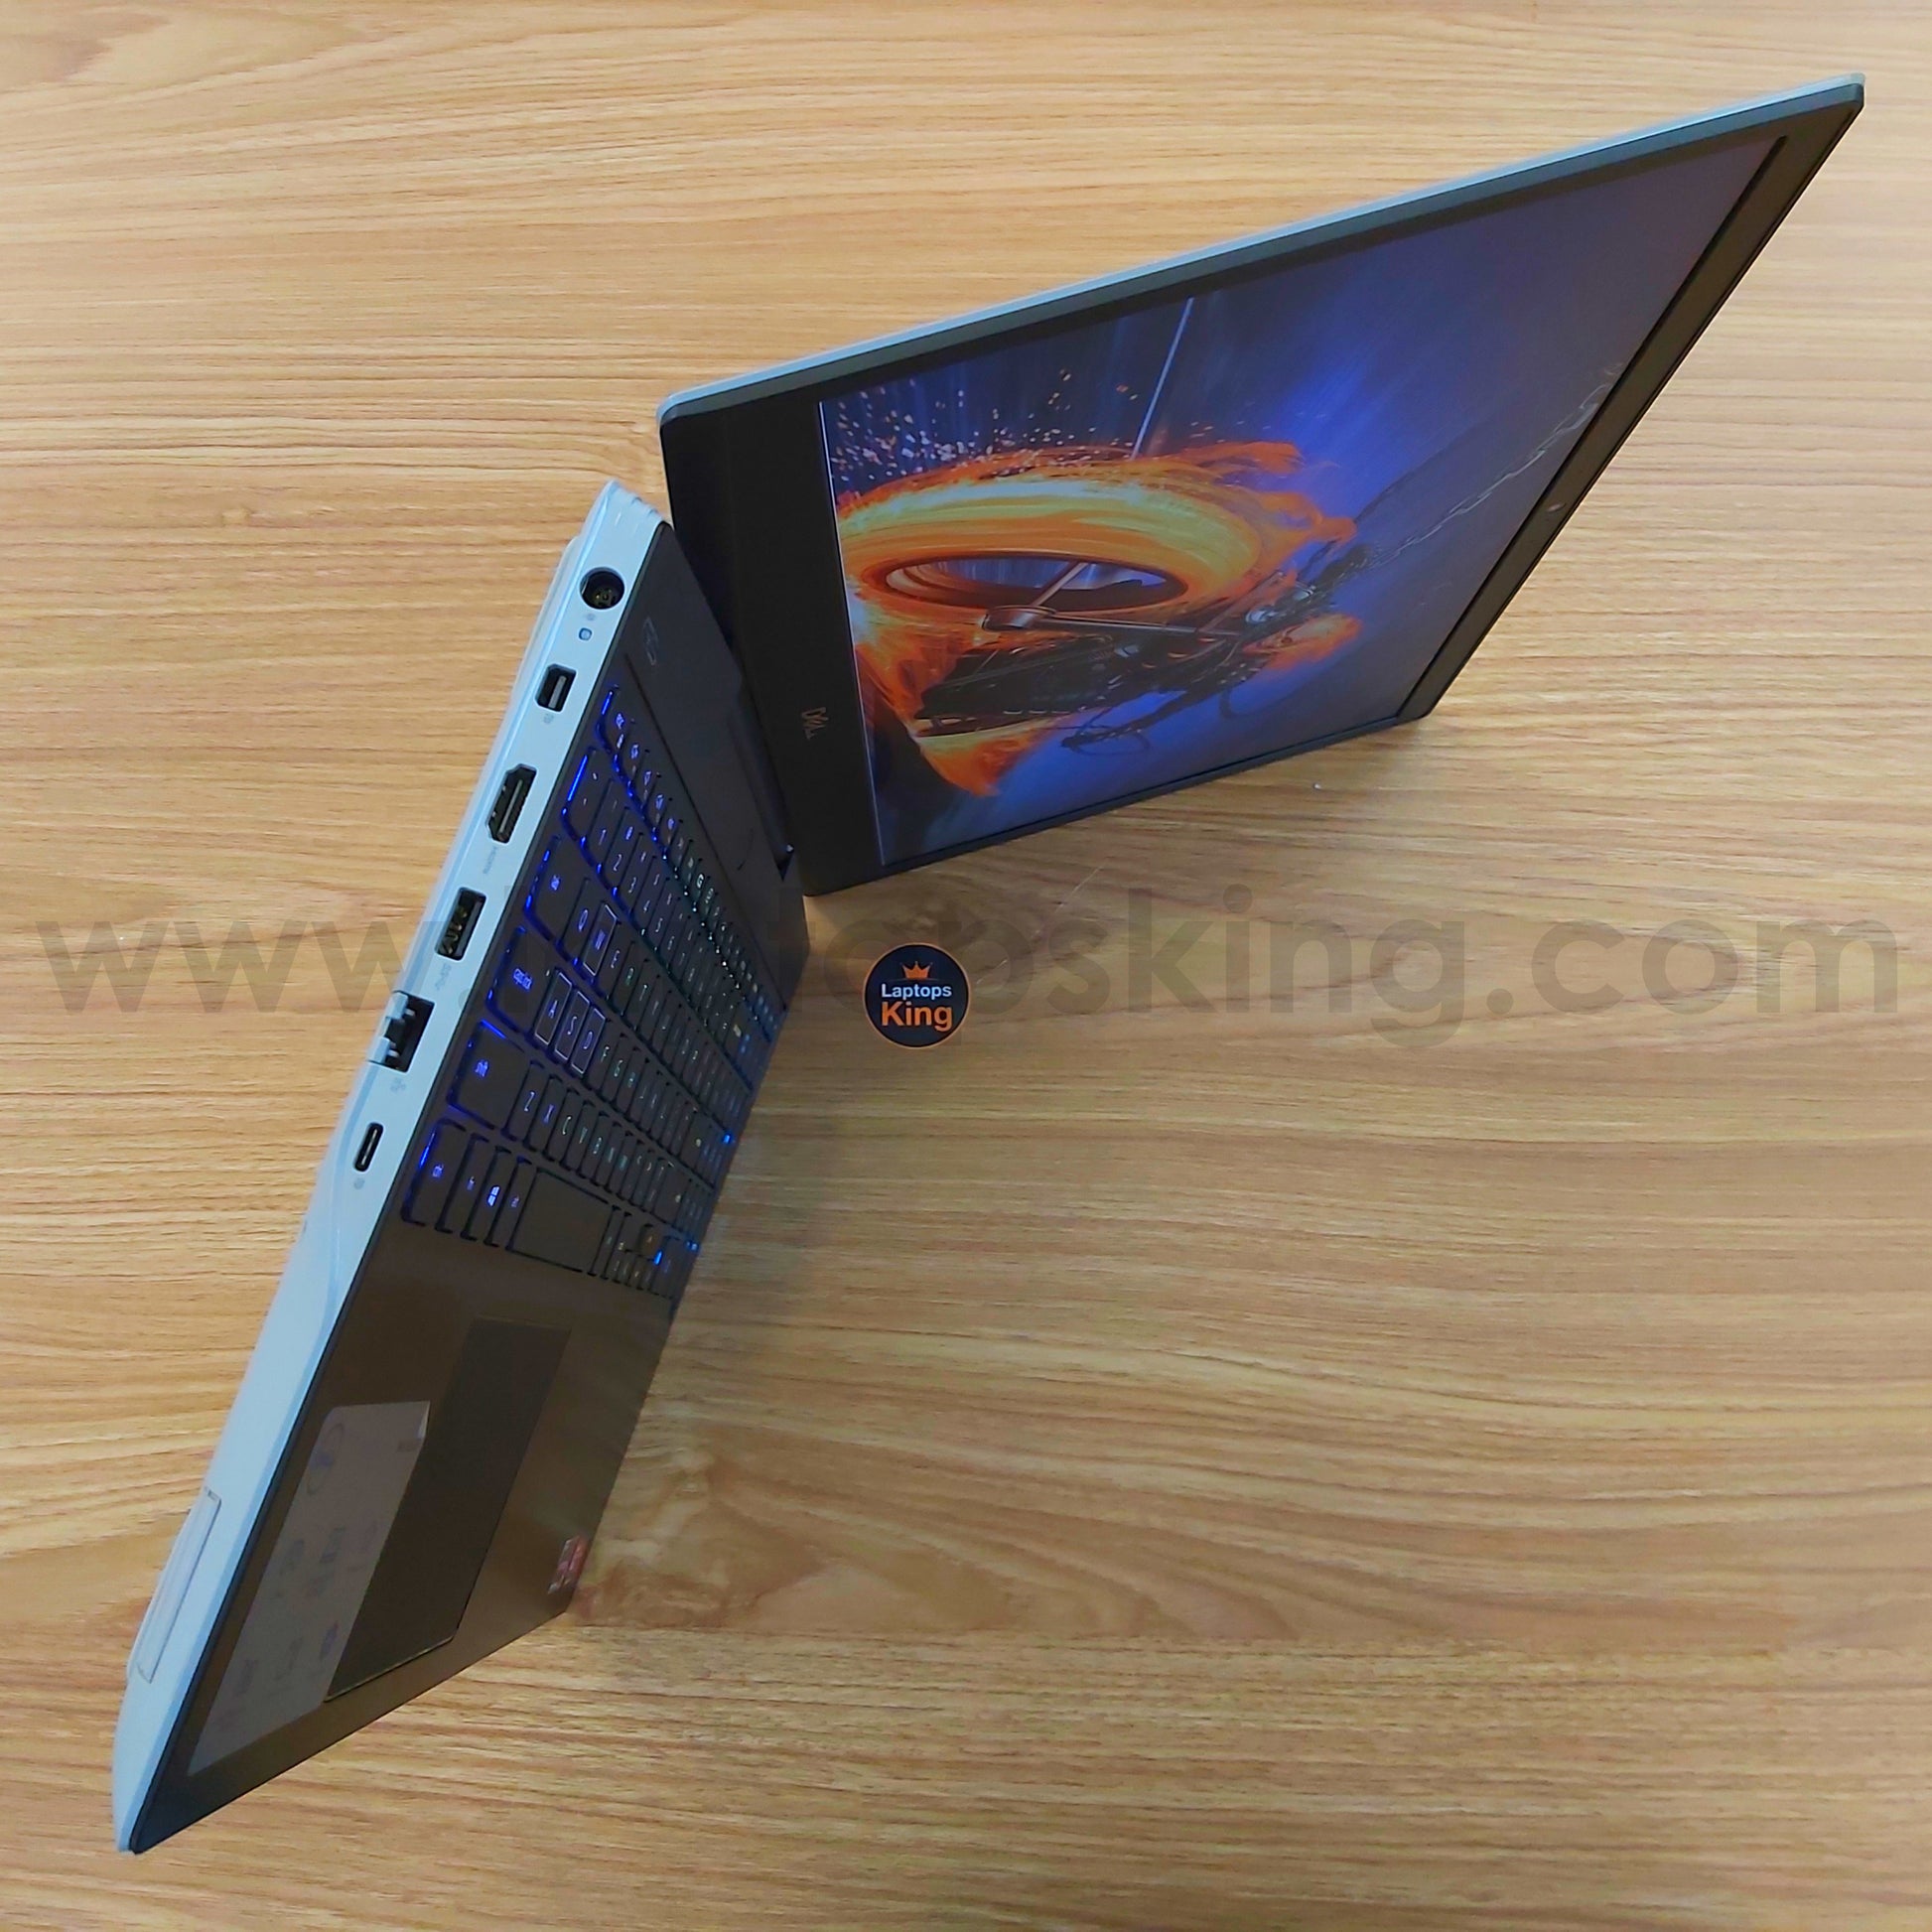 Dell G5 5505 Ryzen 7 4800h Rx 5600m 120hz Gaming Laptop Offers (Open Box) Gaming laptop, Graphic Design laptop, best laptop for gaming, best laptop for graphic design, computer for sale Lebanon, laptop for video editing in Lebanon, laptop for sale Lebanon, best graphic design laptop,	best video editing laptop, best programming laptop, laptop for sale in Lebanon, laptops for sale in Lebanon, laptop for sale in Lebanon, buy computer Lebanon, buy laptop Lebanon.